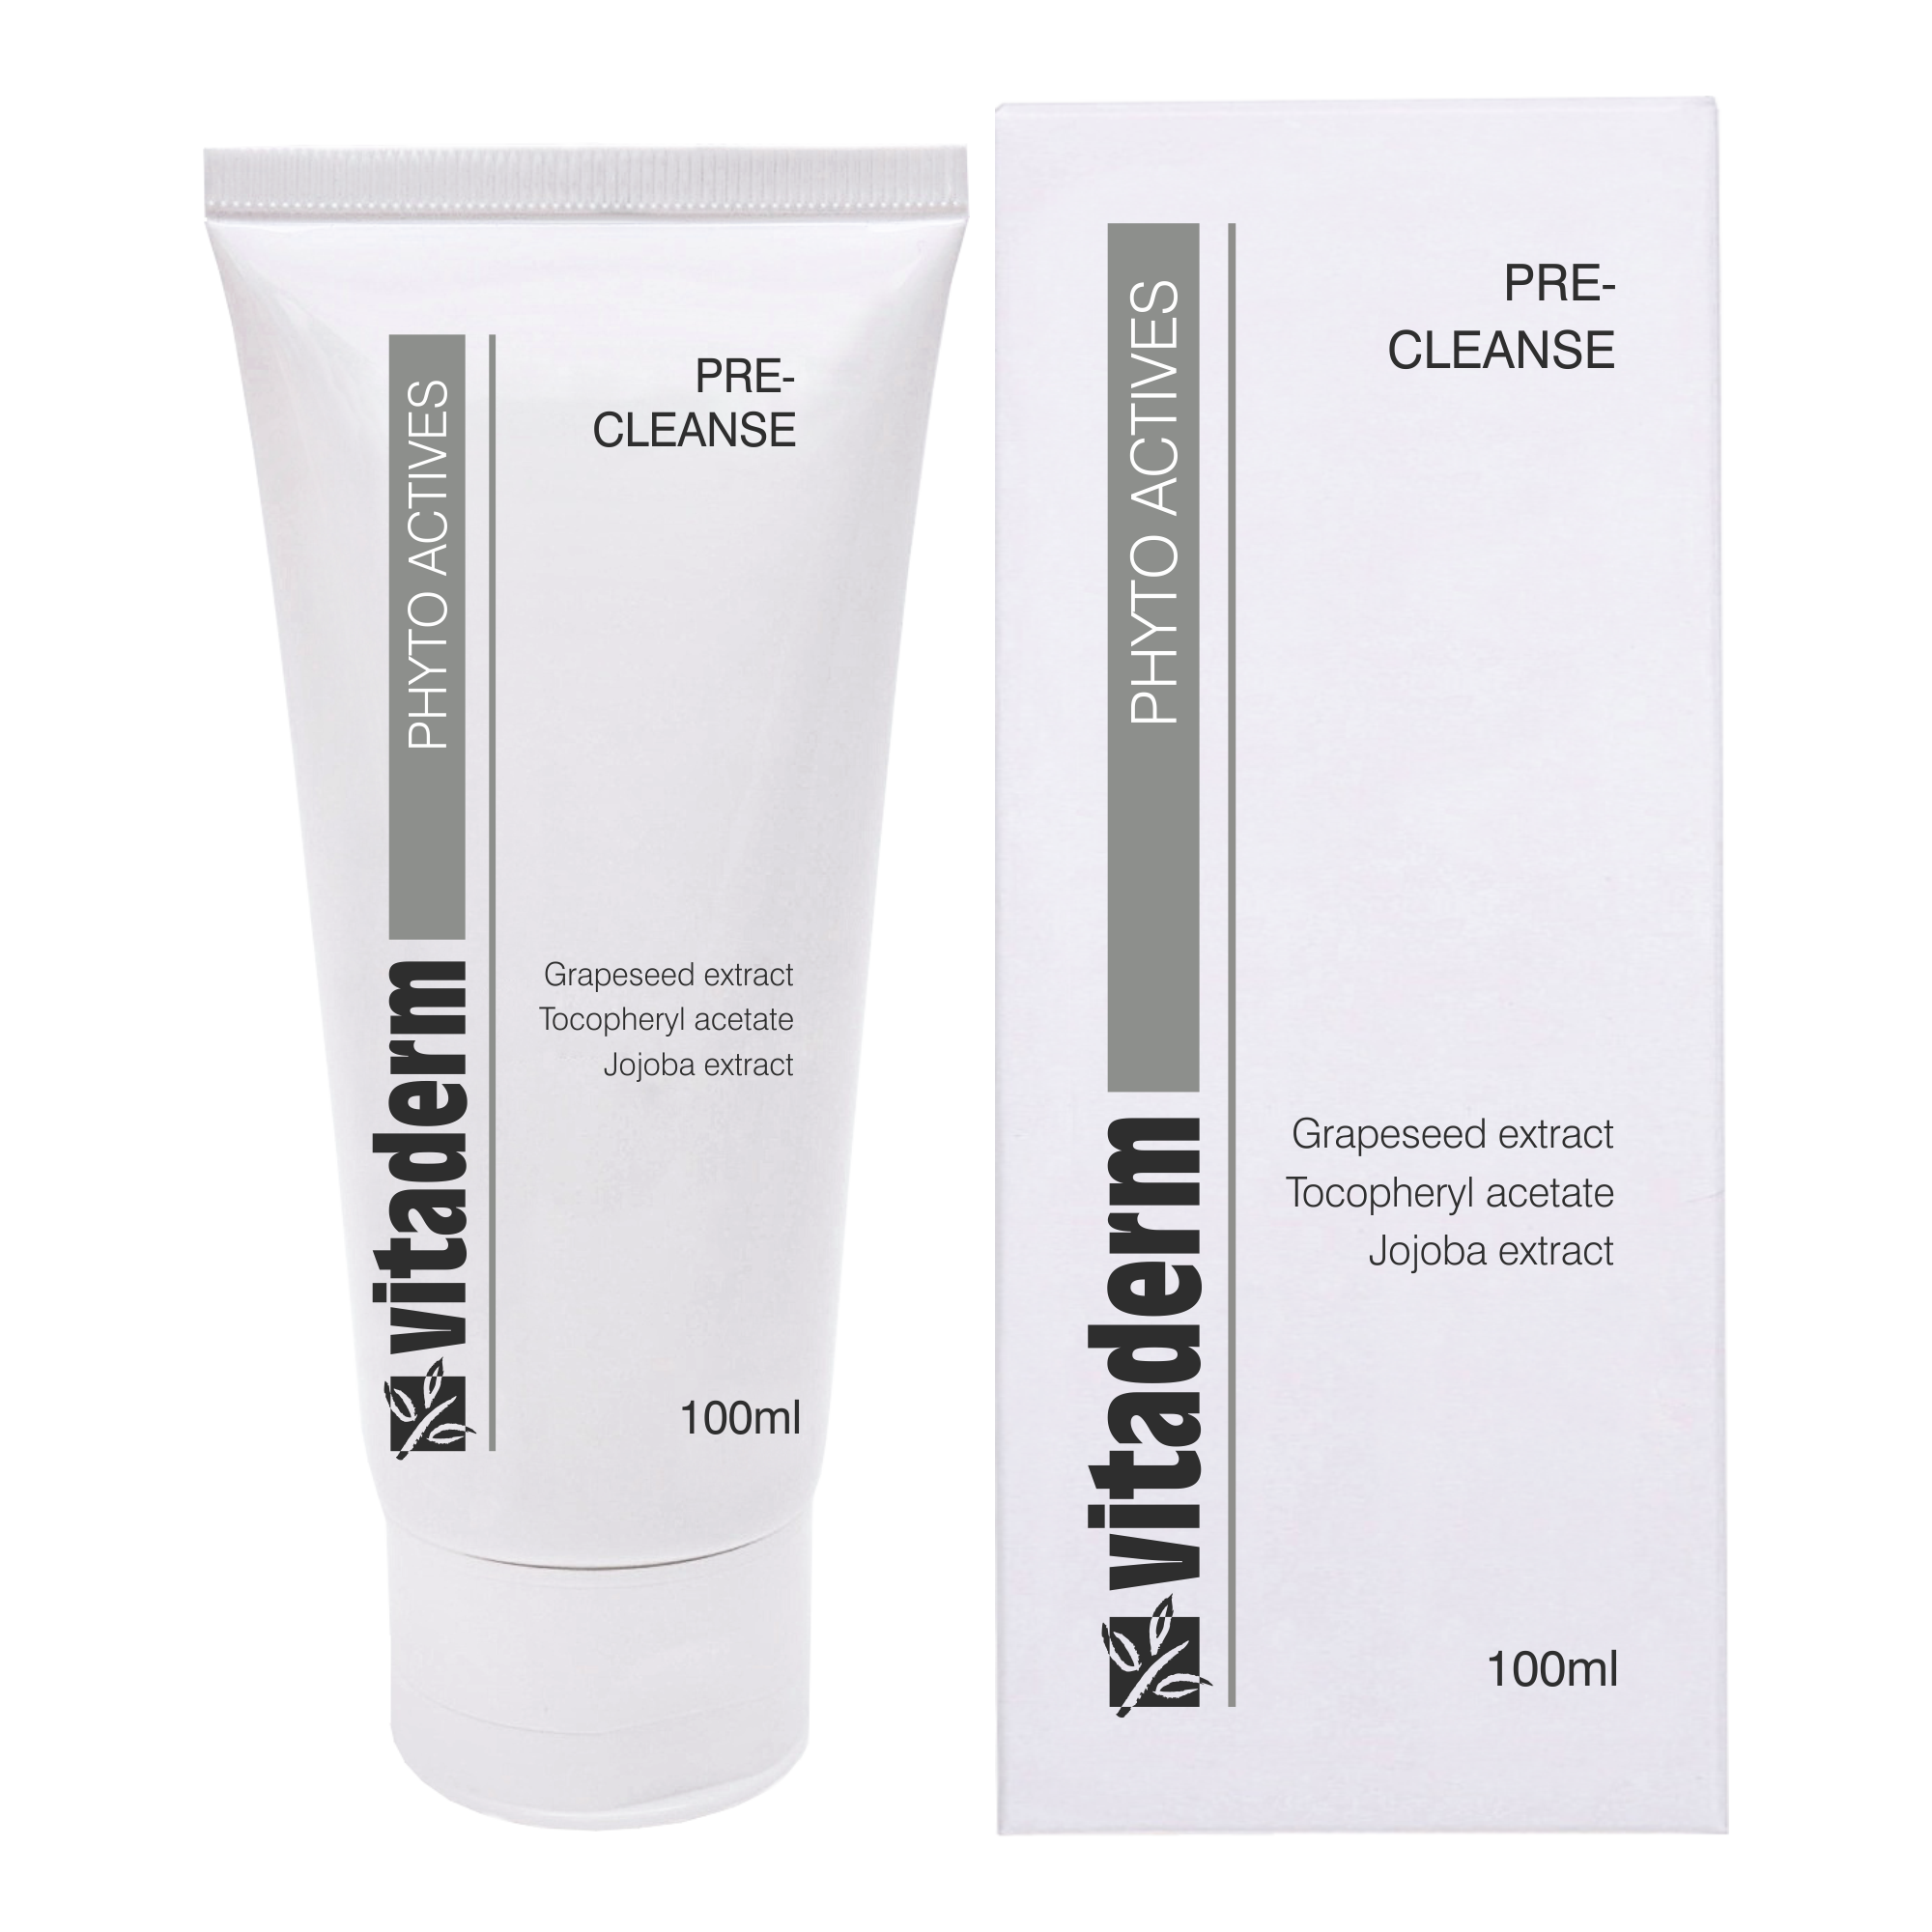 cleanser-pre-cleanse